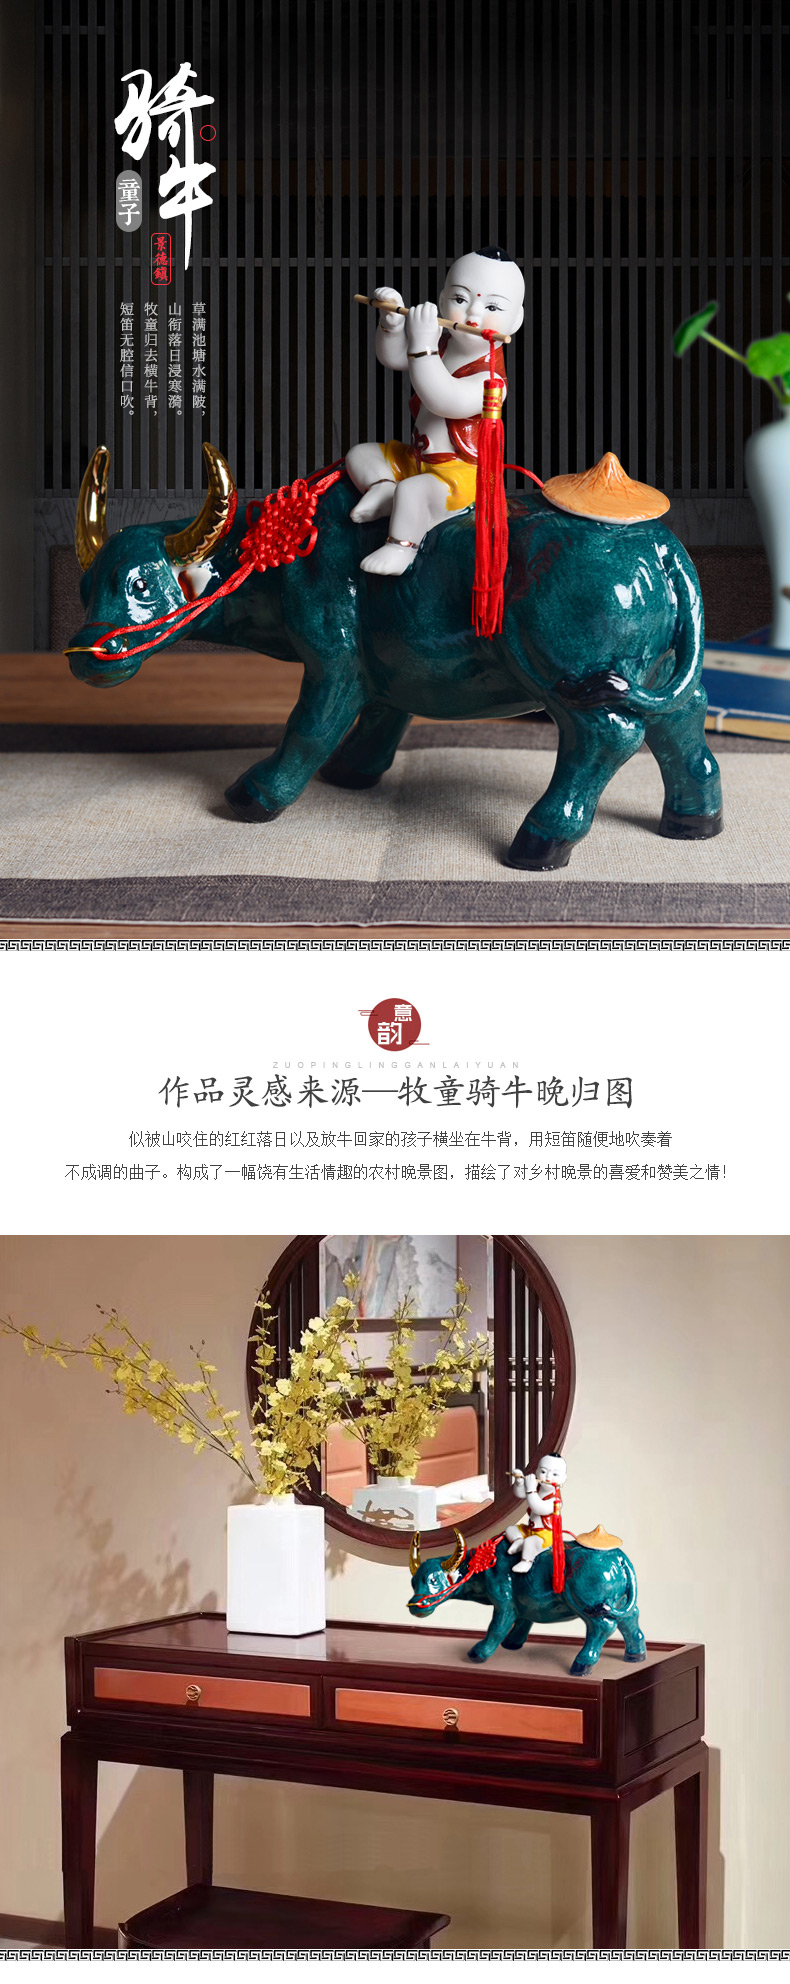 The sitting room adornment is placed cowboy ride cow wine ark of jingdezhen ceramics art decoration of Chinese style household handicraft